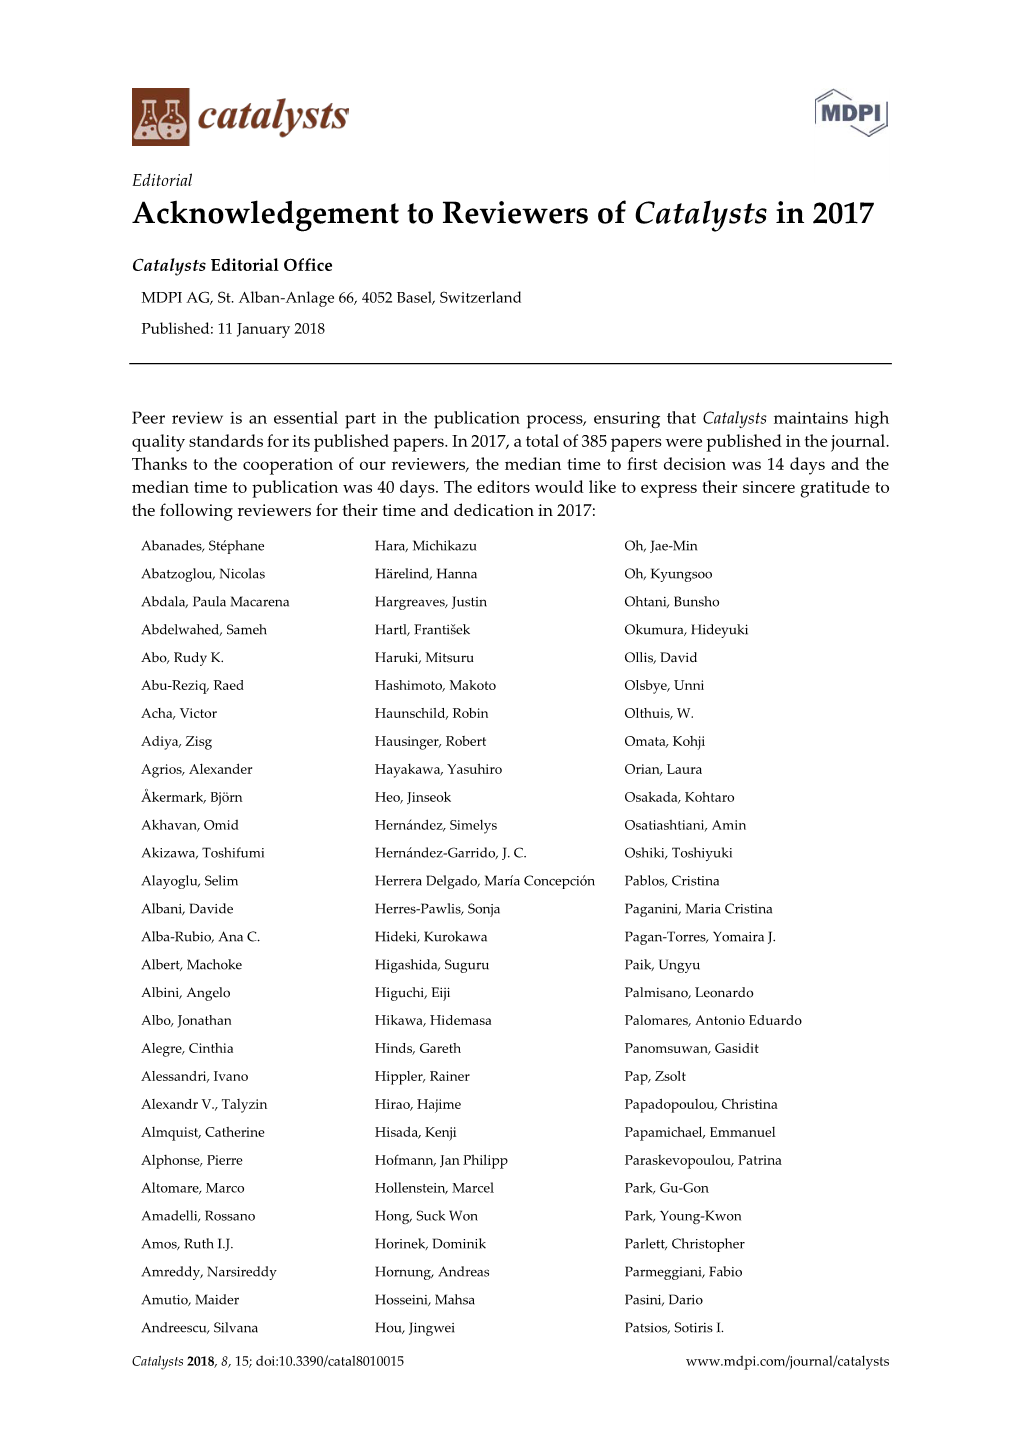 Acknowledgement to Reviewers of Catalysts in 2017